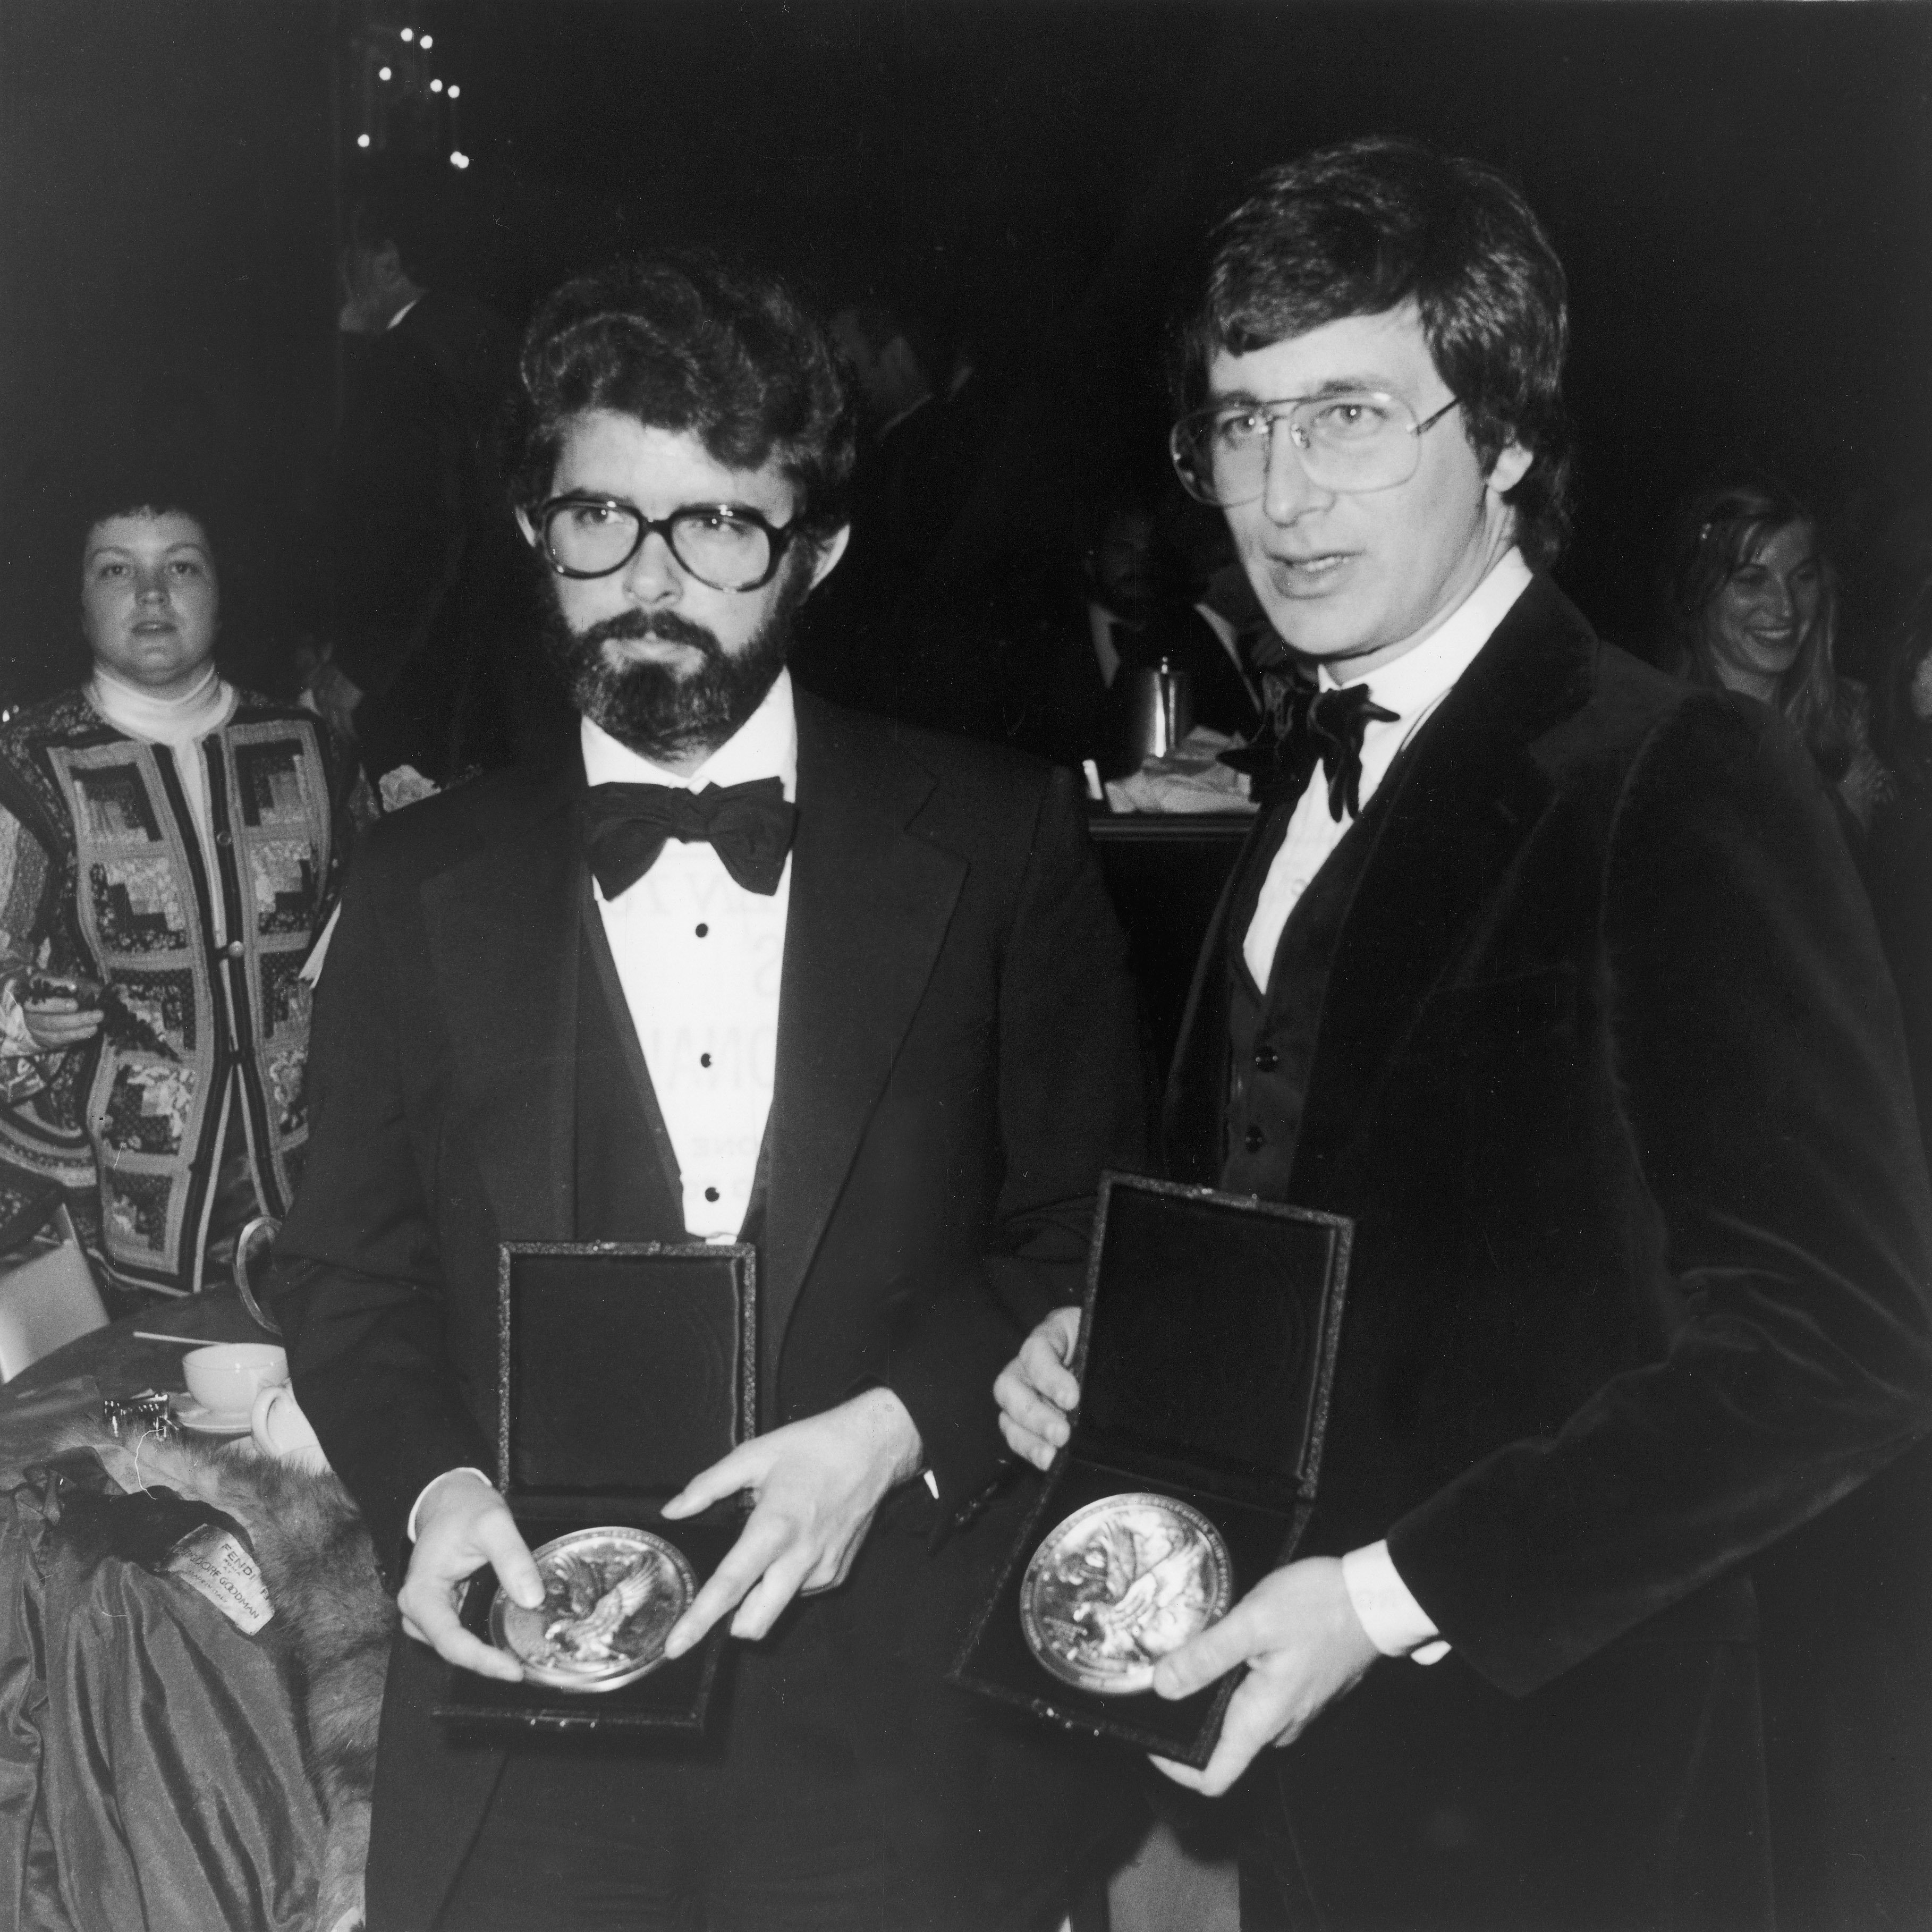 George Lucas and Steven Spielberg at the Directors Guild of America annual awards dinner in California on March 11, 1978 | Source: Getty Images